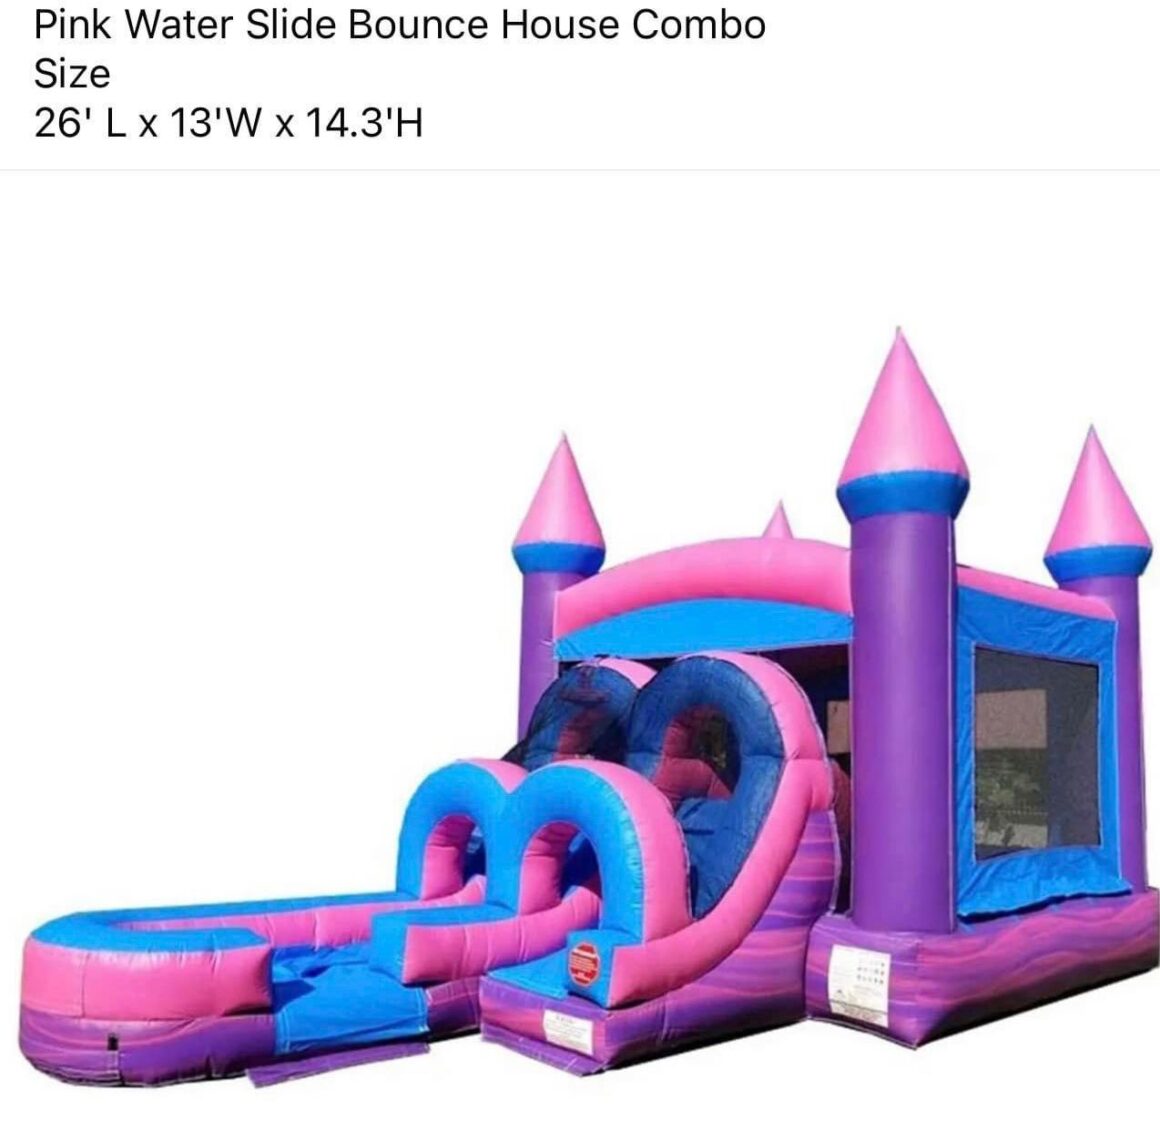 Inflatable Pink Water Slide Bounce House Combo – SIZE 26′ LX13′ WX14.3’H